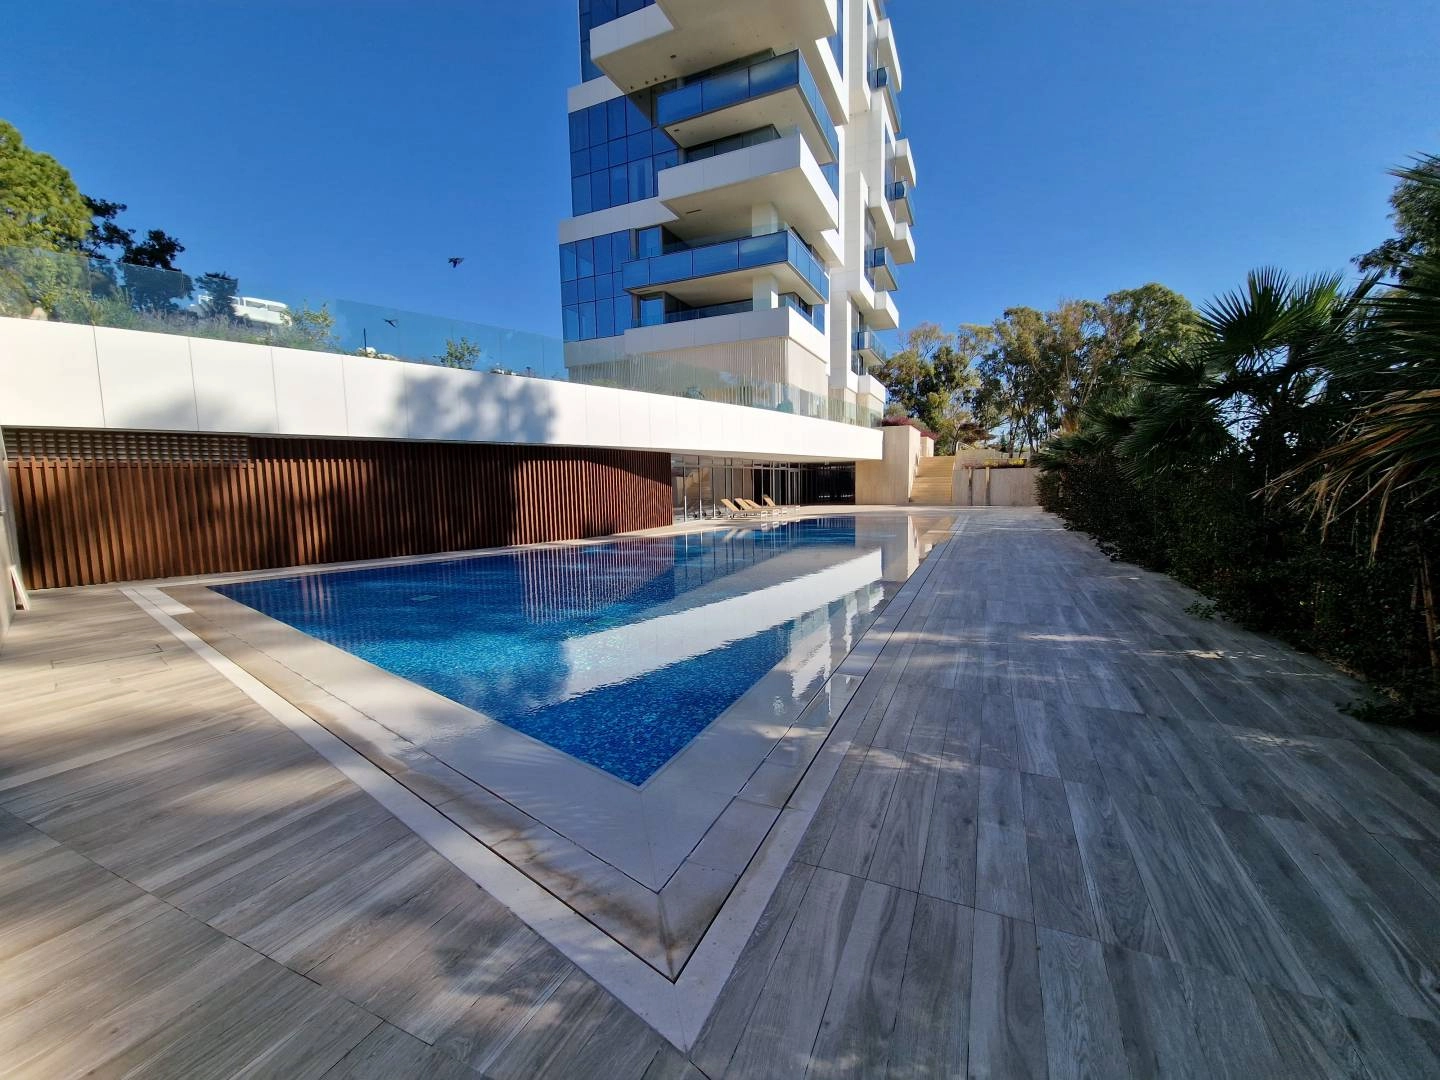 4 Bedroom Apartment for Sale in Agios Tychonas, Limassol District